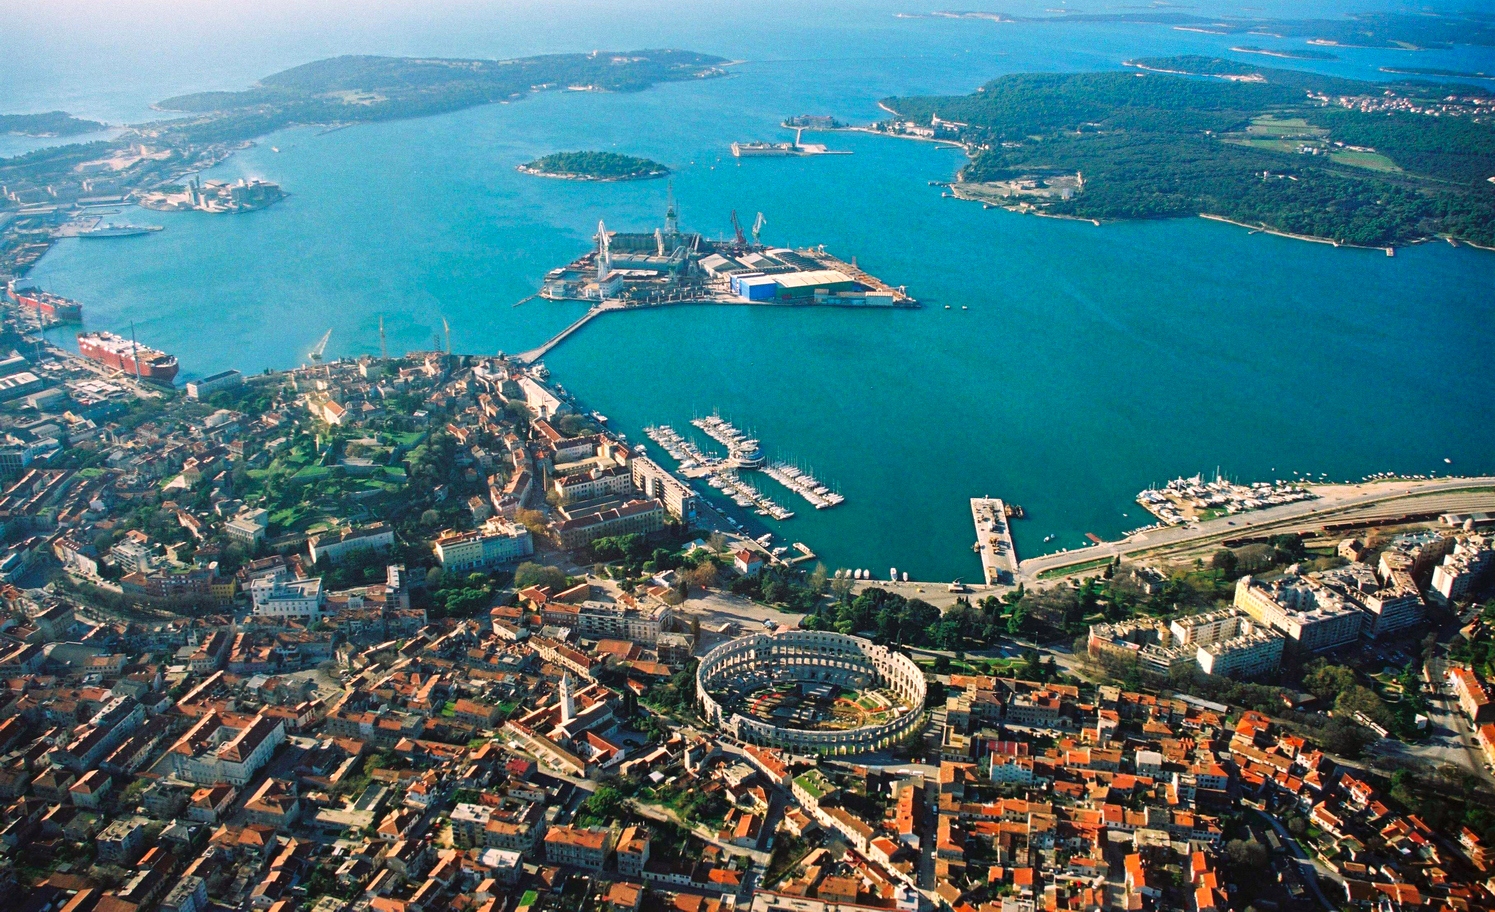 sailing istria routes starts in Pula, one of Istria's most important cities